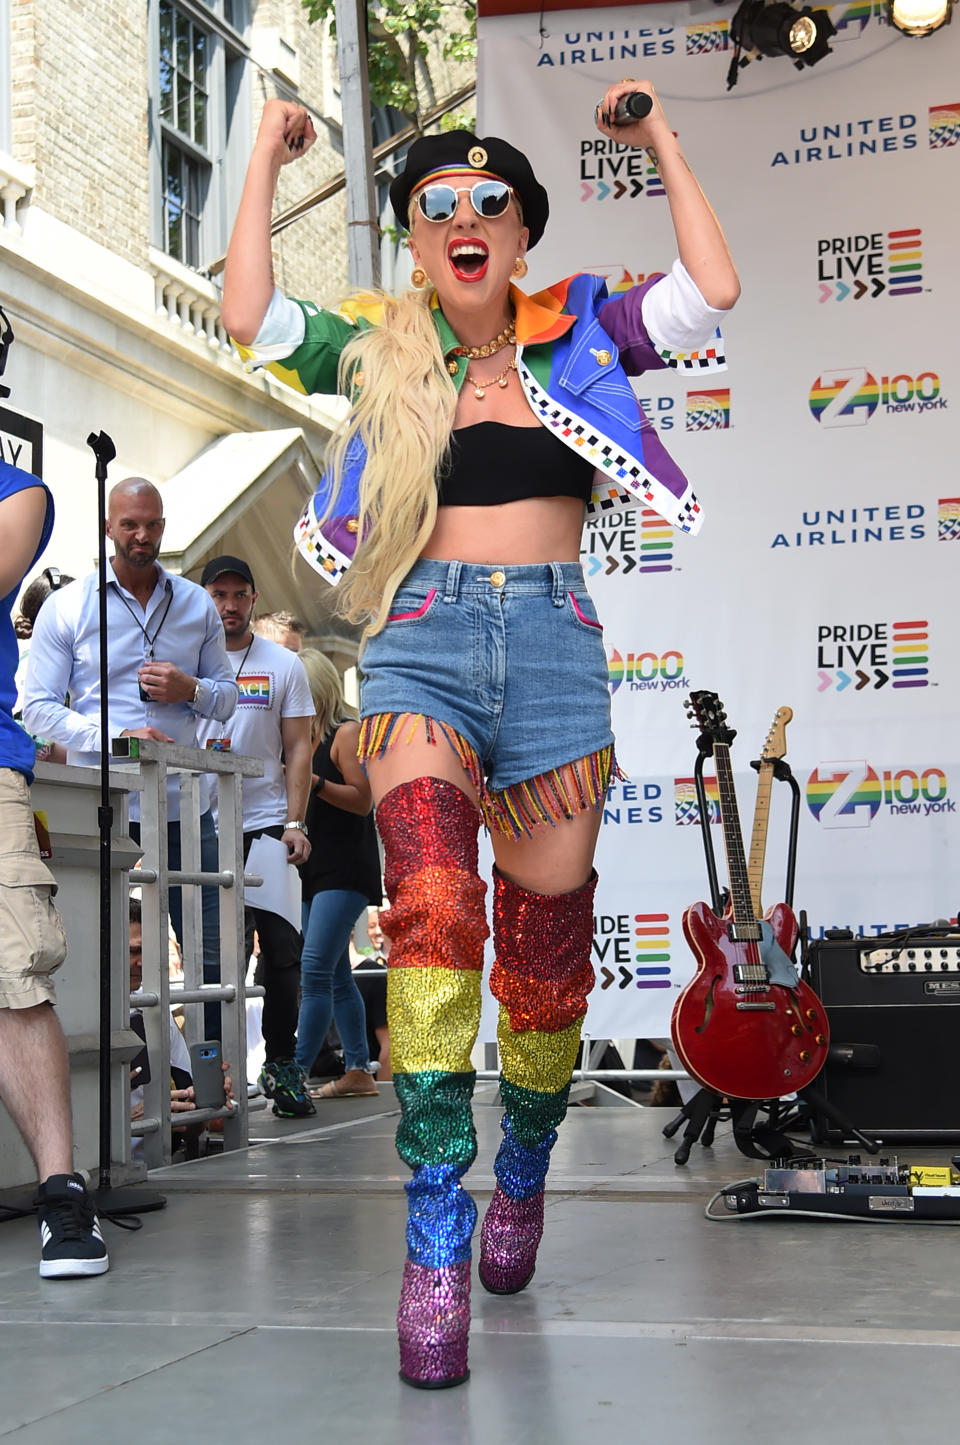 NEW YORK, NEW YORK - JUNE 28:  Lady Gaga speaks onstage during Pride Live's 2019 Stonewall Day on June 28, 2019 in New York City. (Photo by Jamie McCarthy/Getty Images for Pride Live)